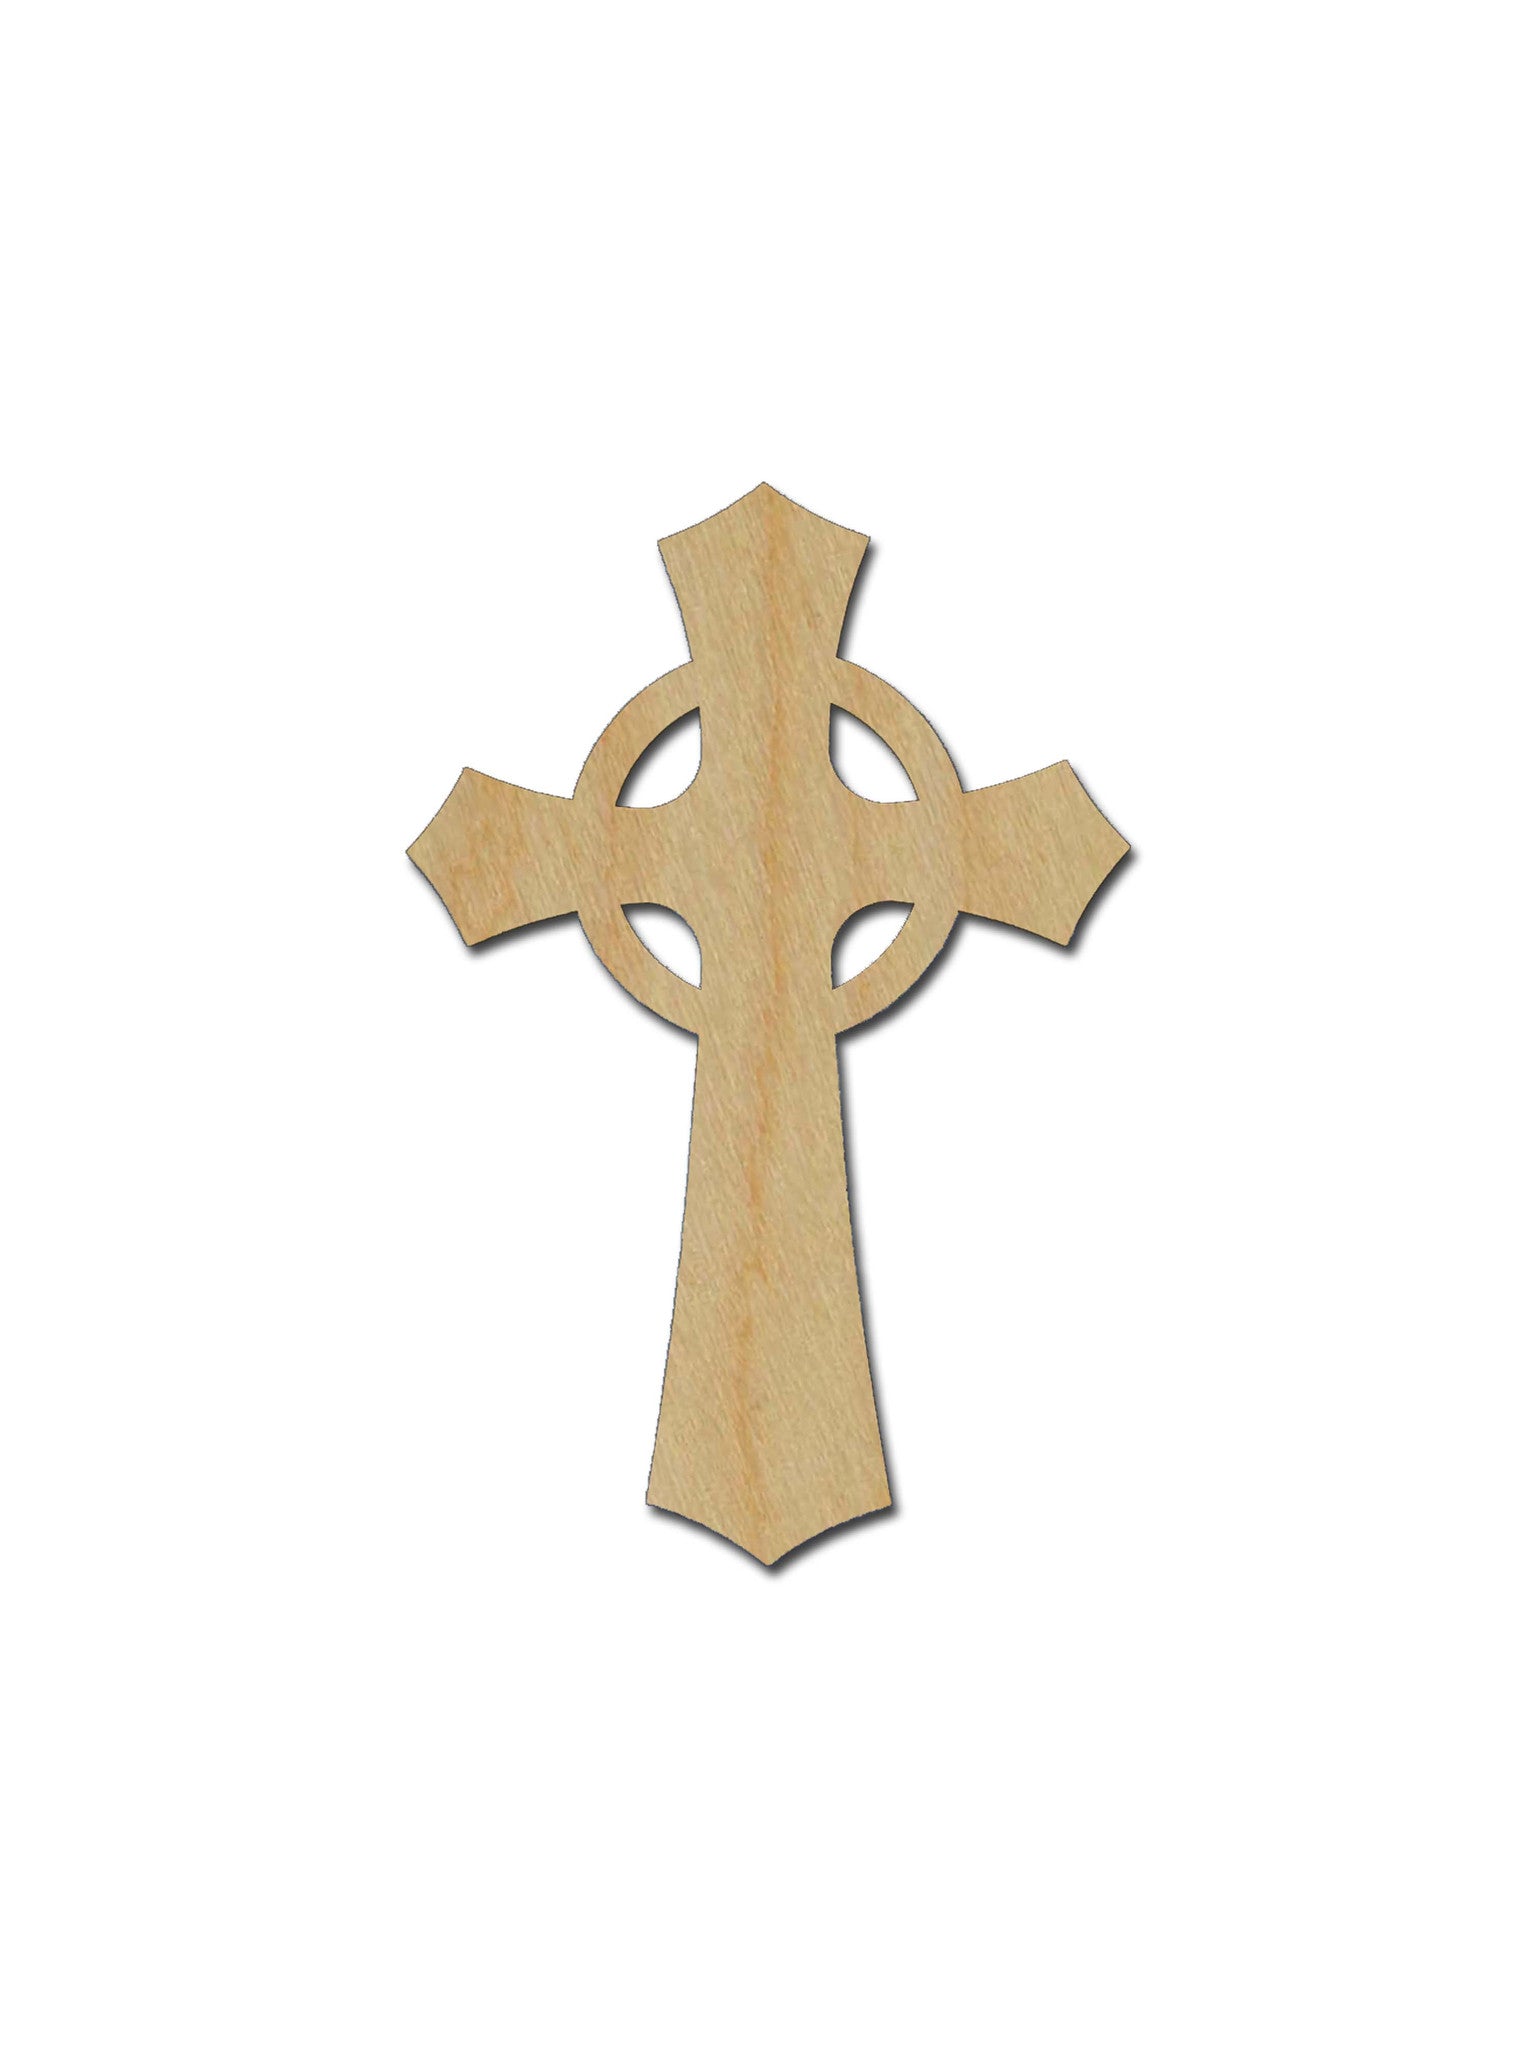 small wooden crosses for crafts